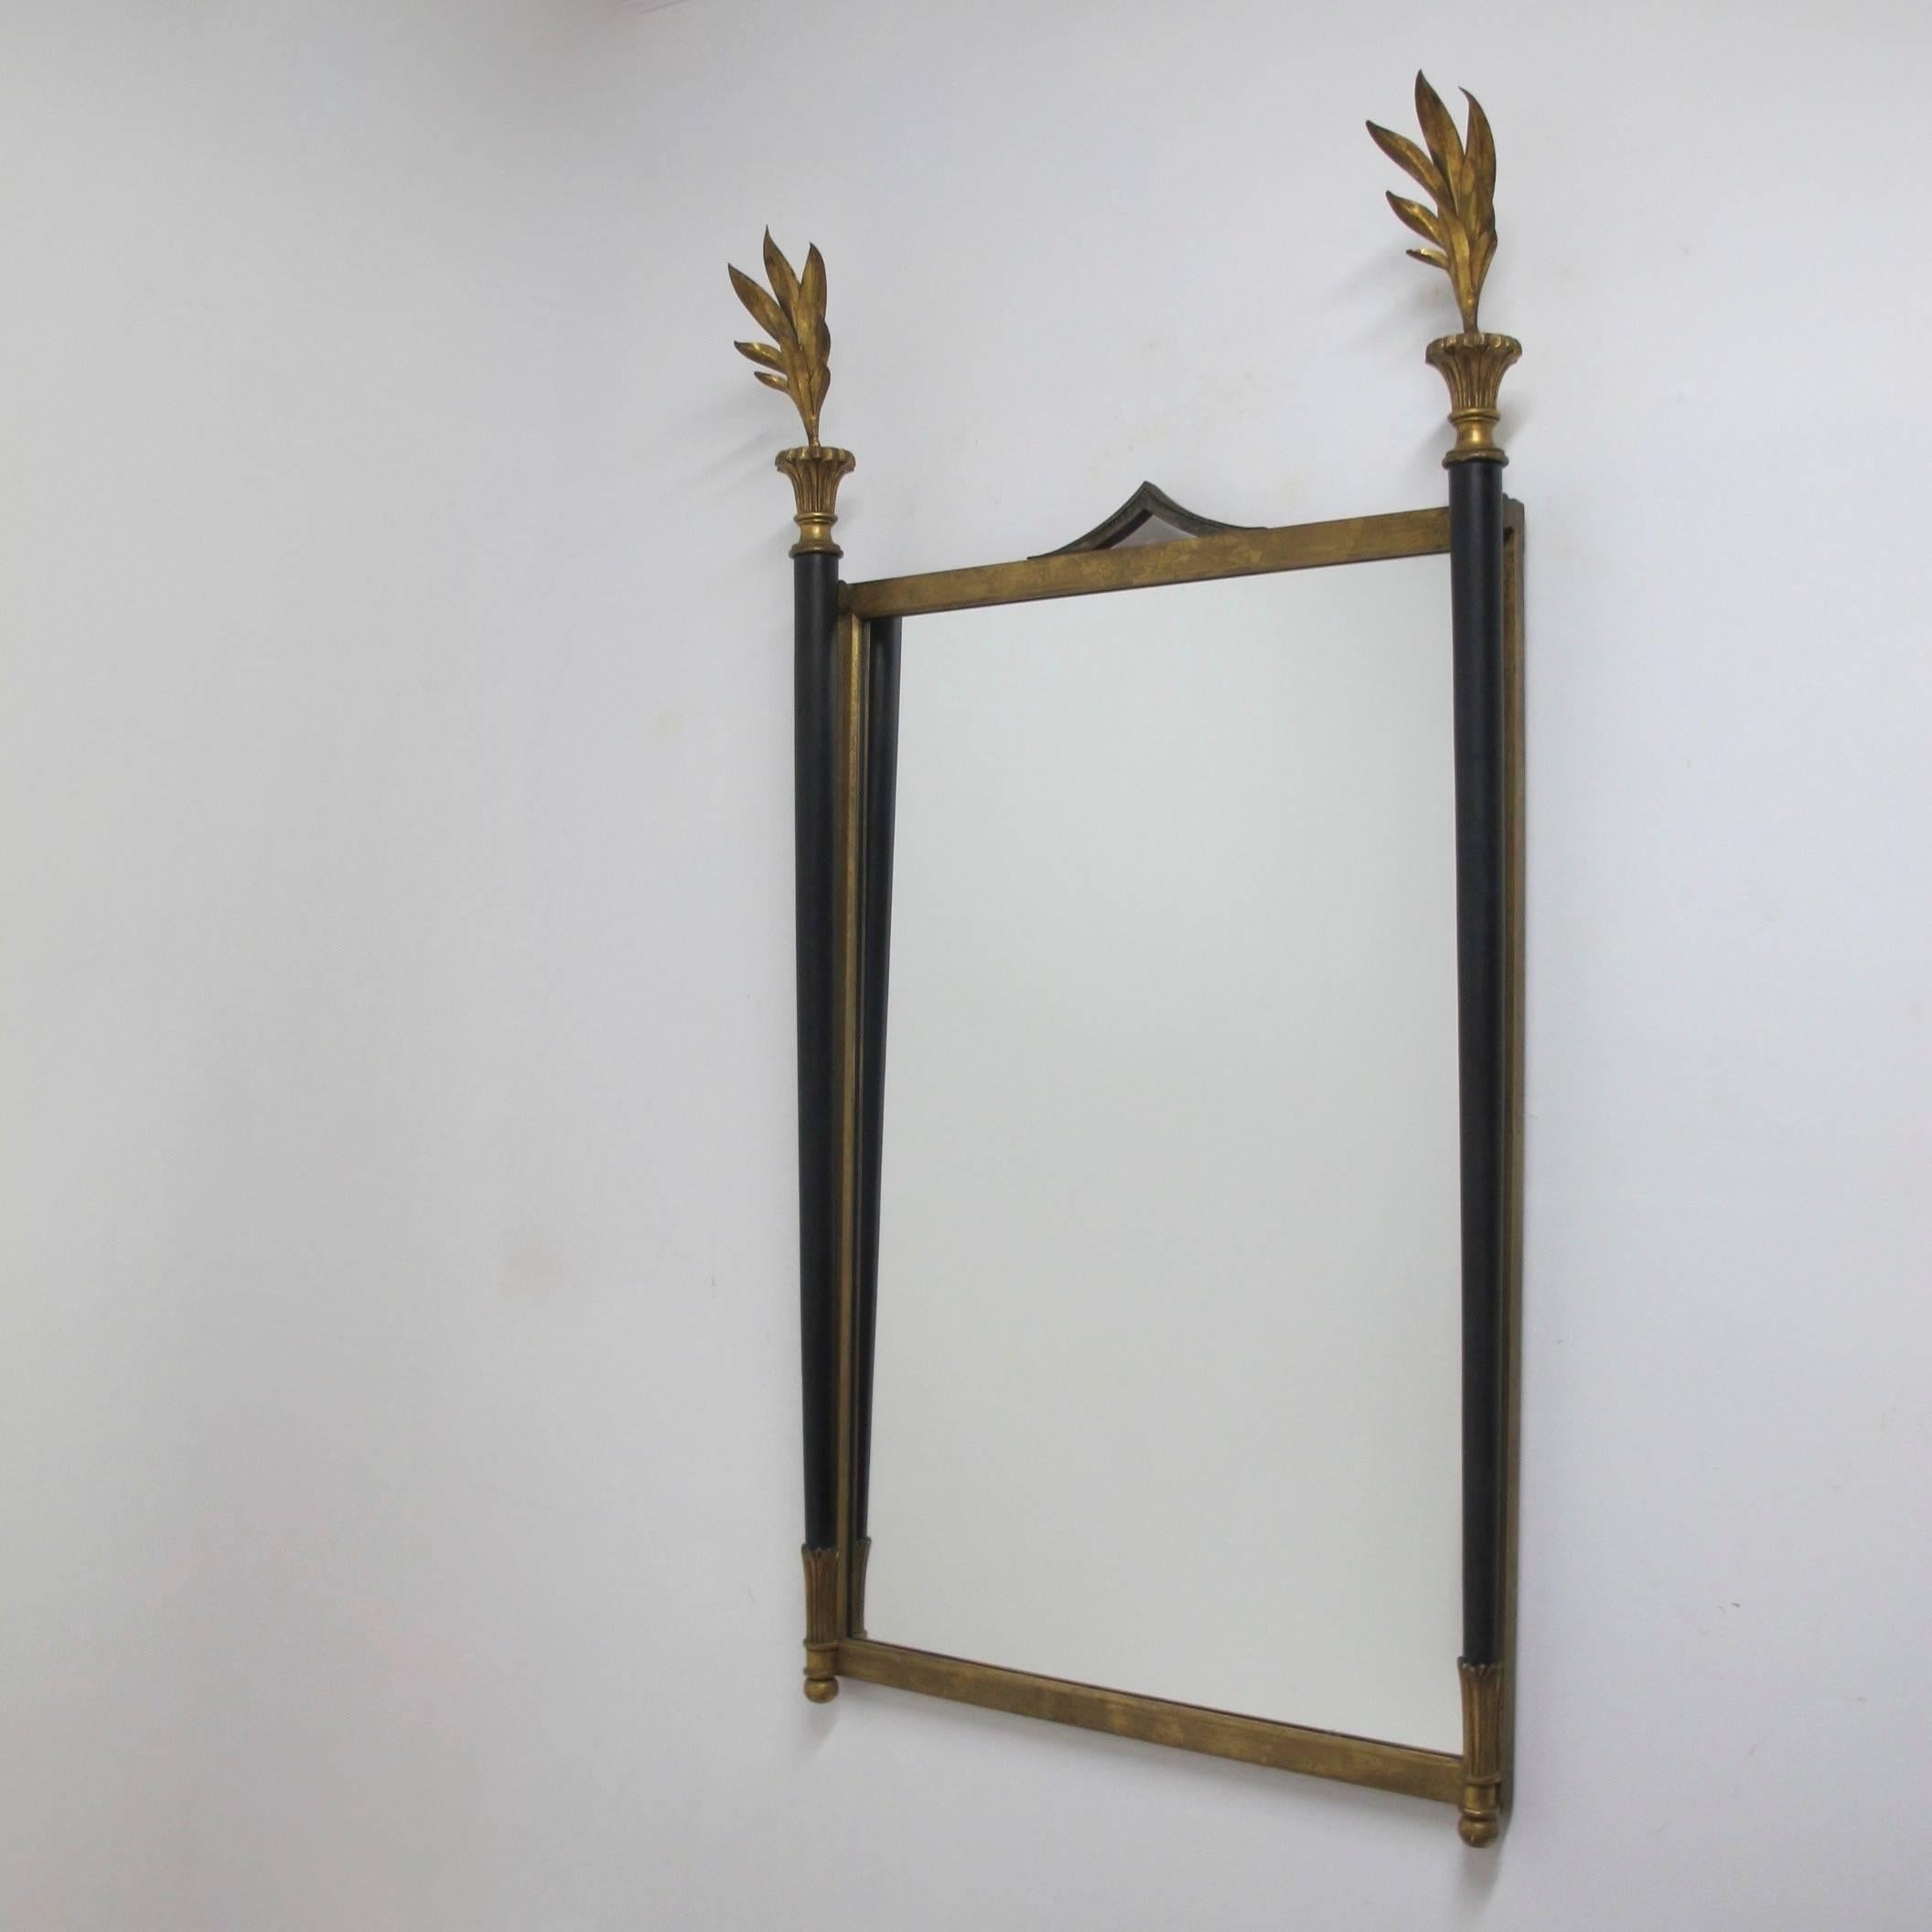 Neoclassical style iron mirror with gilt tole frawn finials and ebonized columns. Having the original Palladio paper label on the back. Italy, circa 1960s.